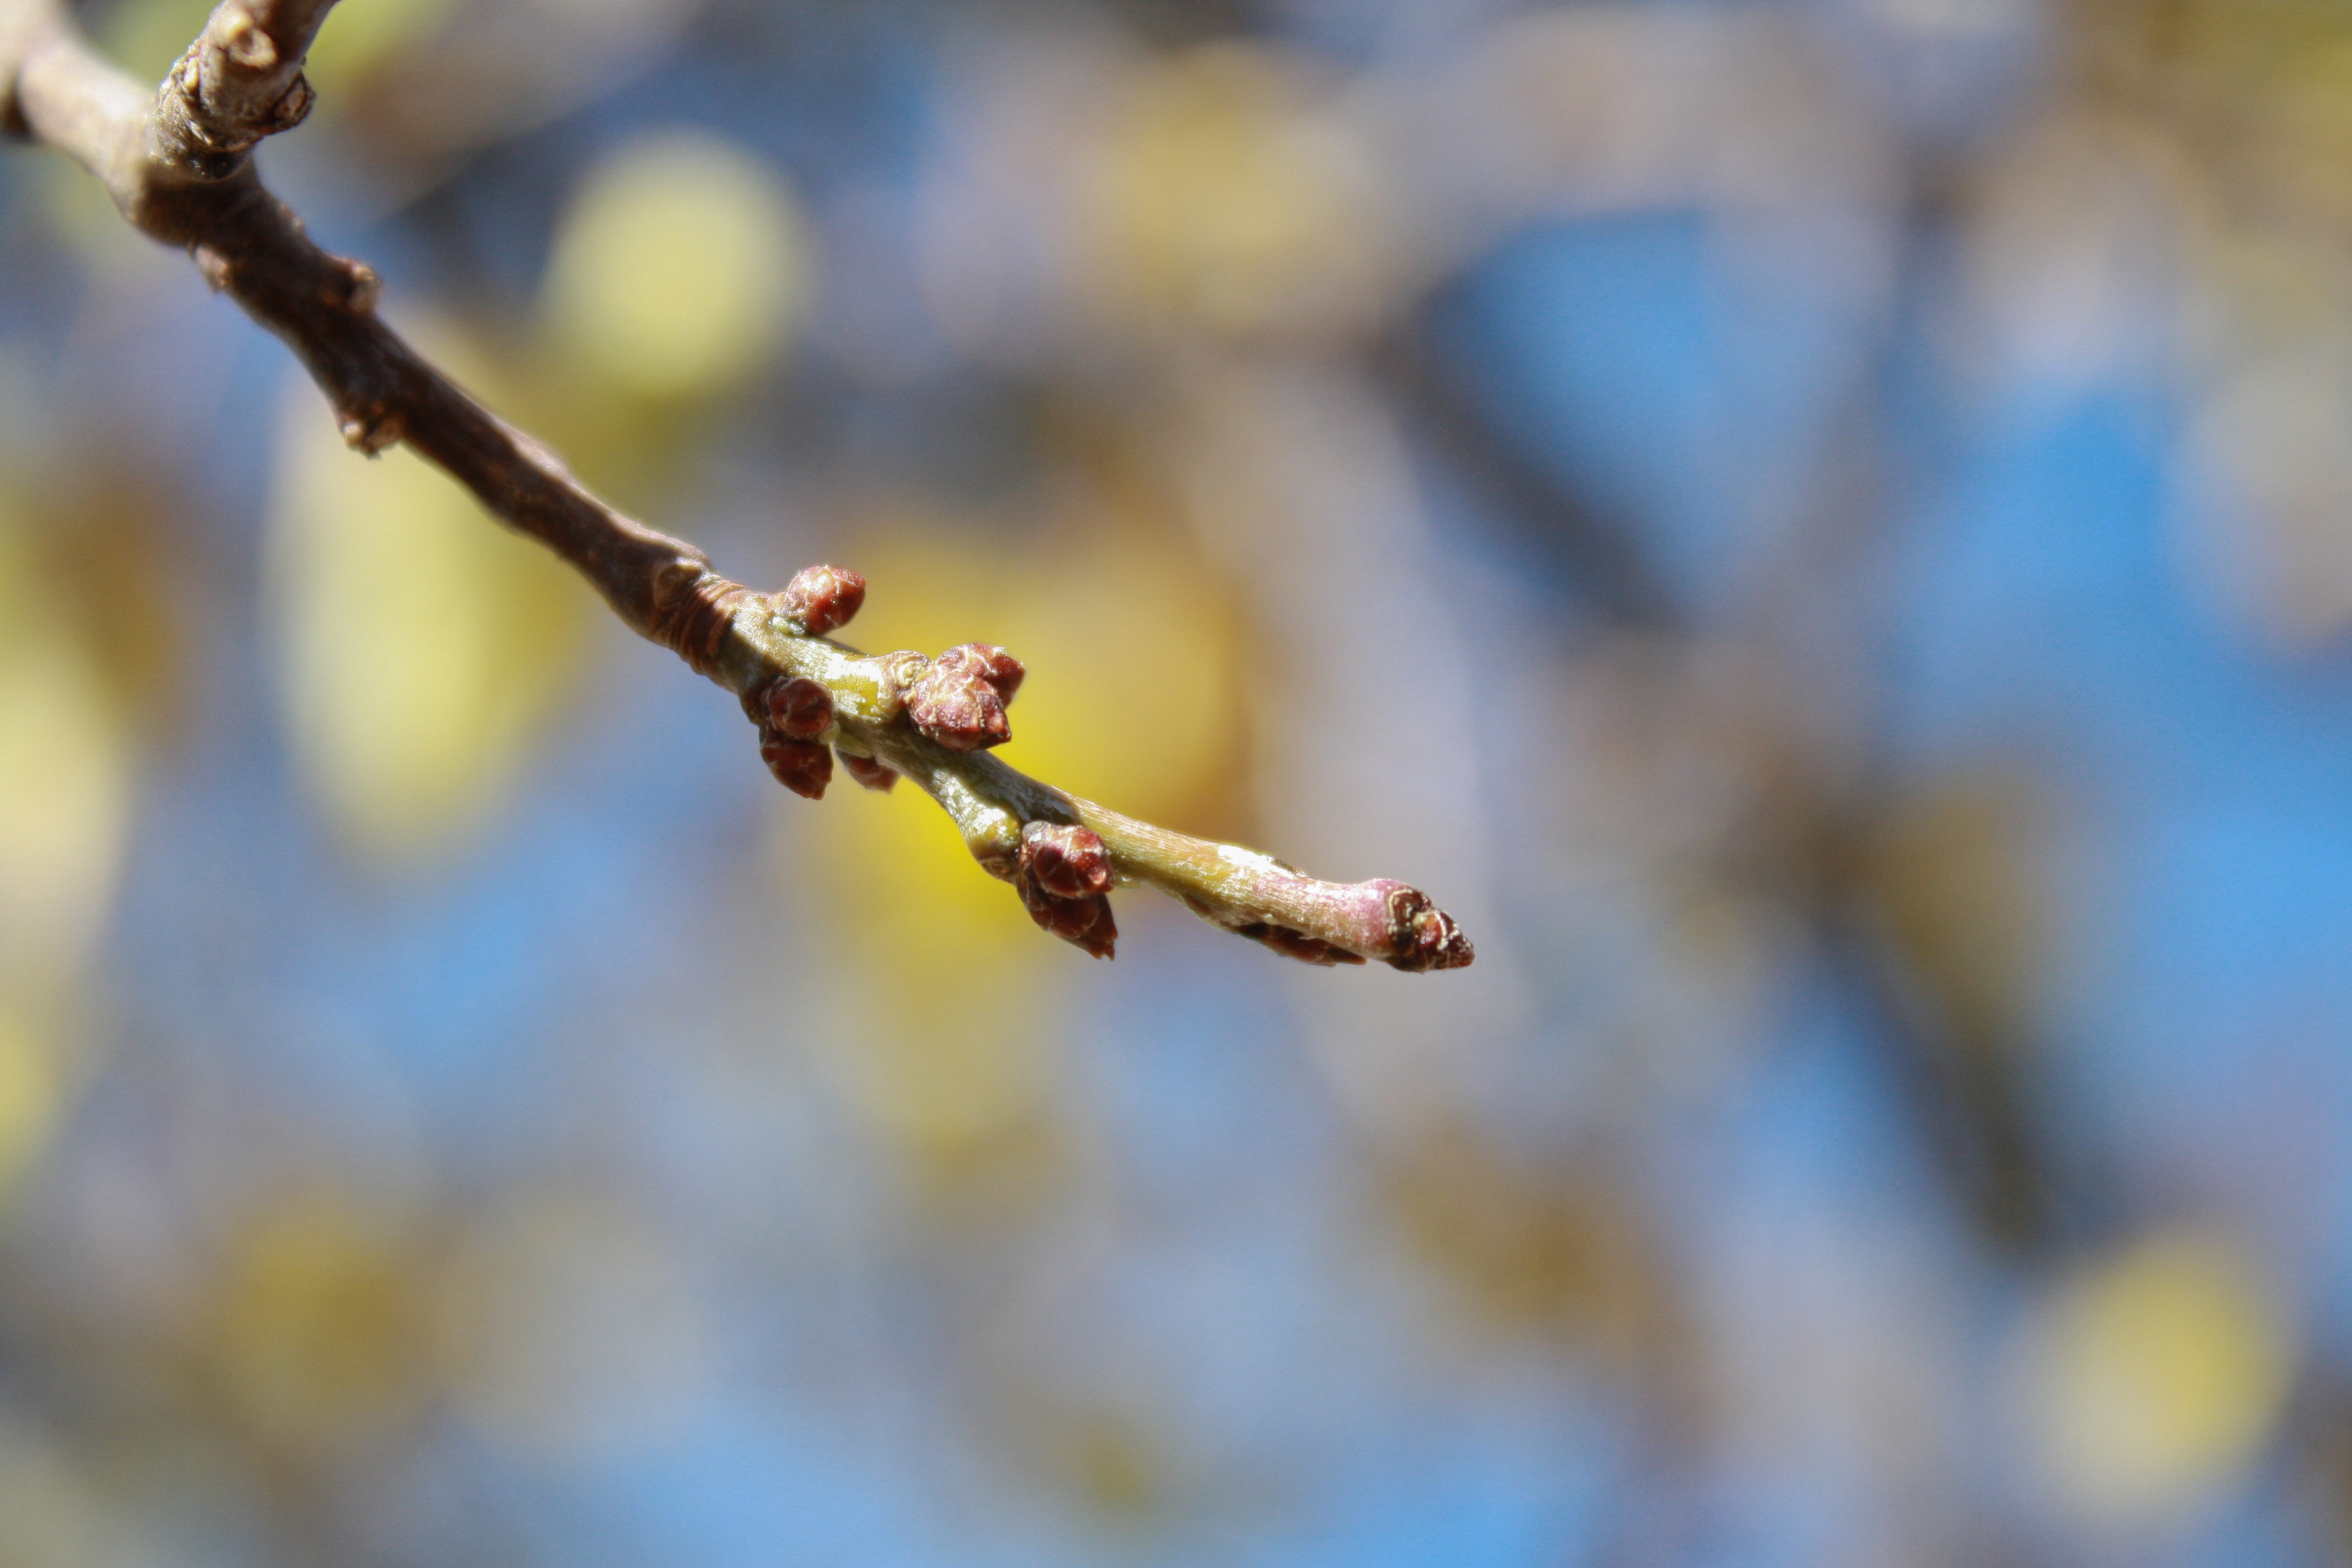 What's That?” Wednesday: Fall Tree Buds